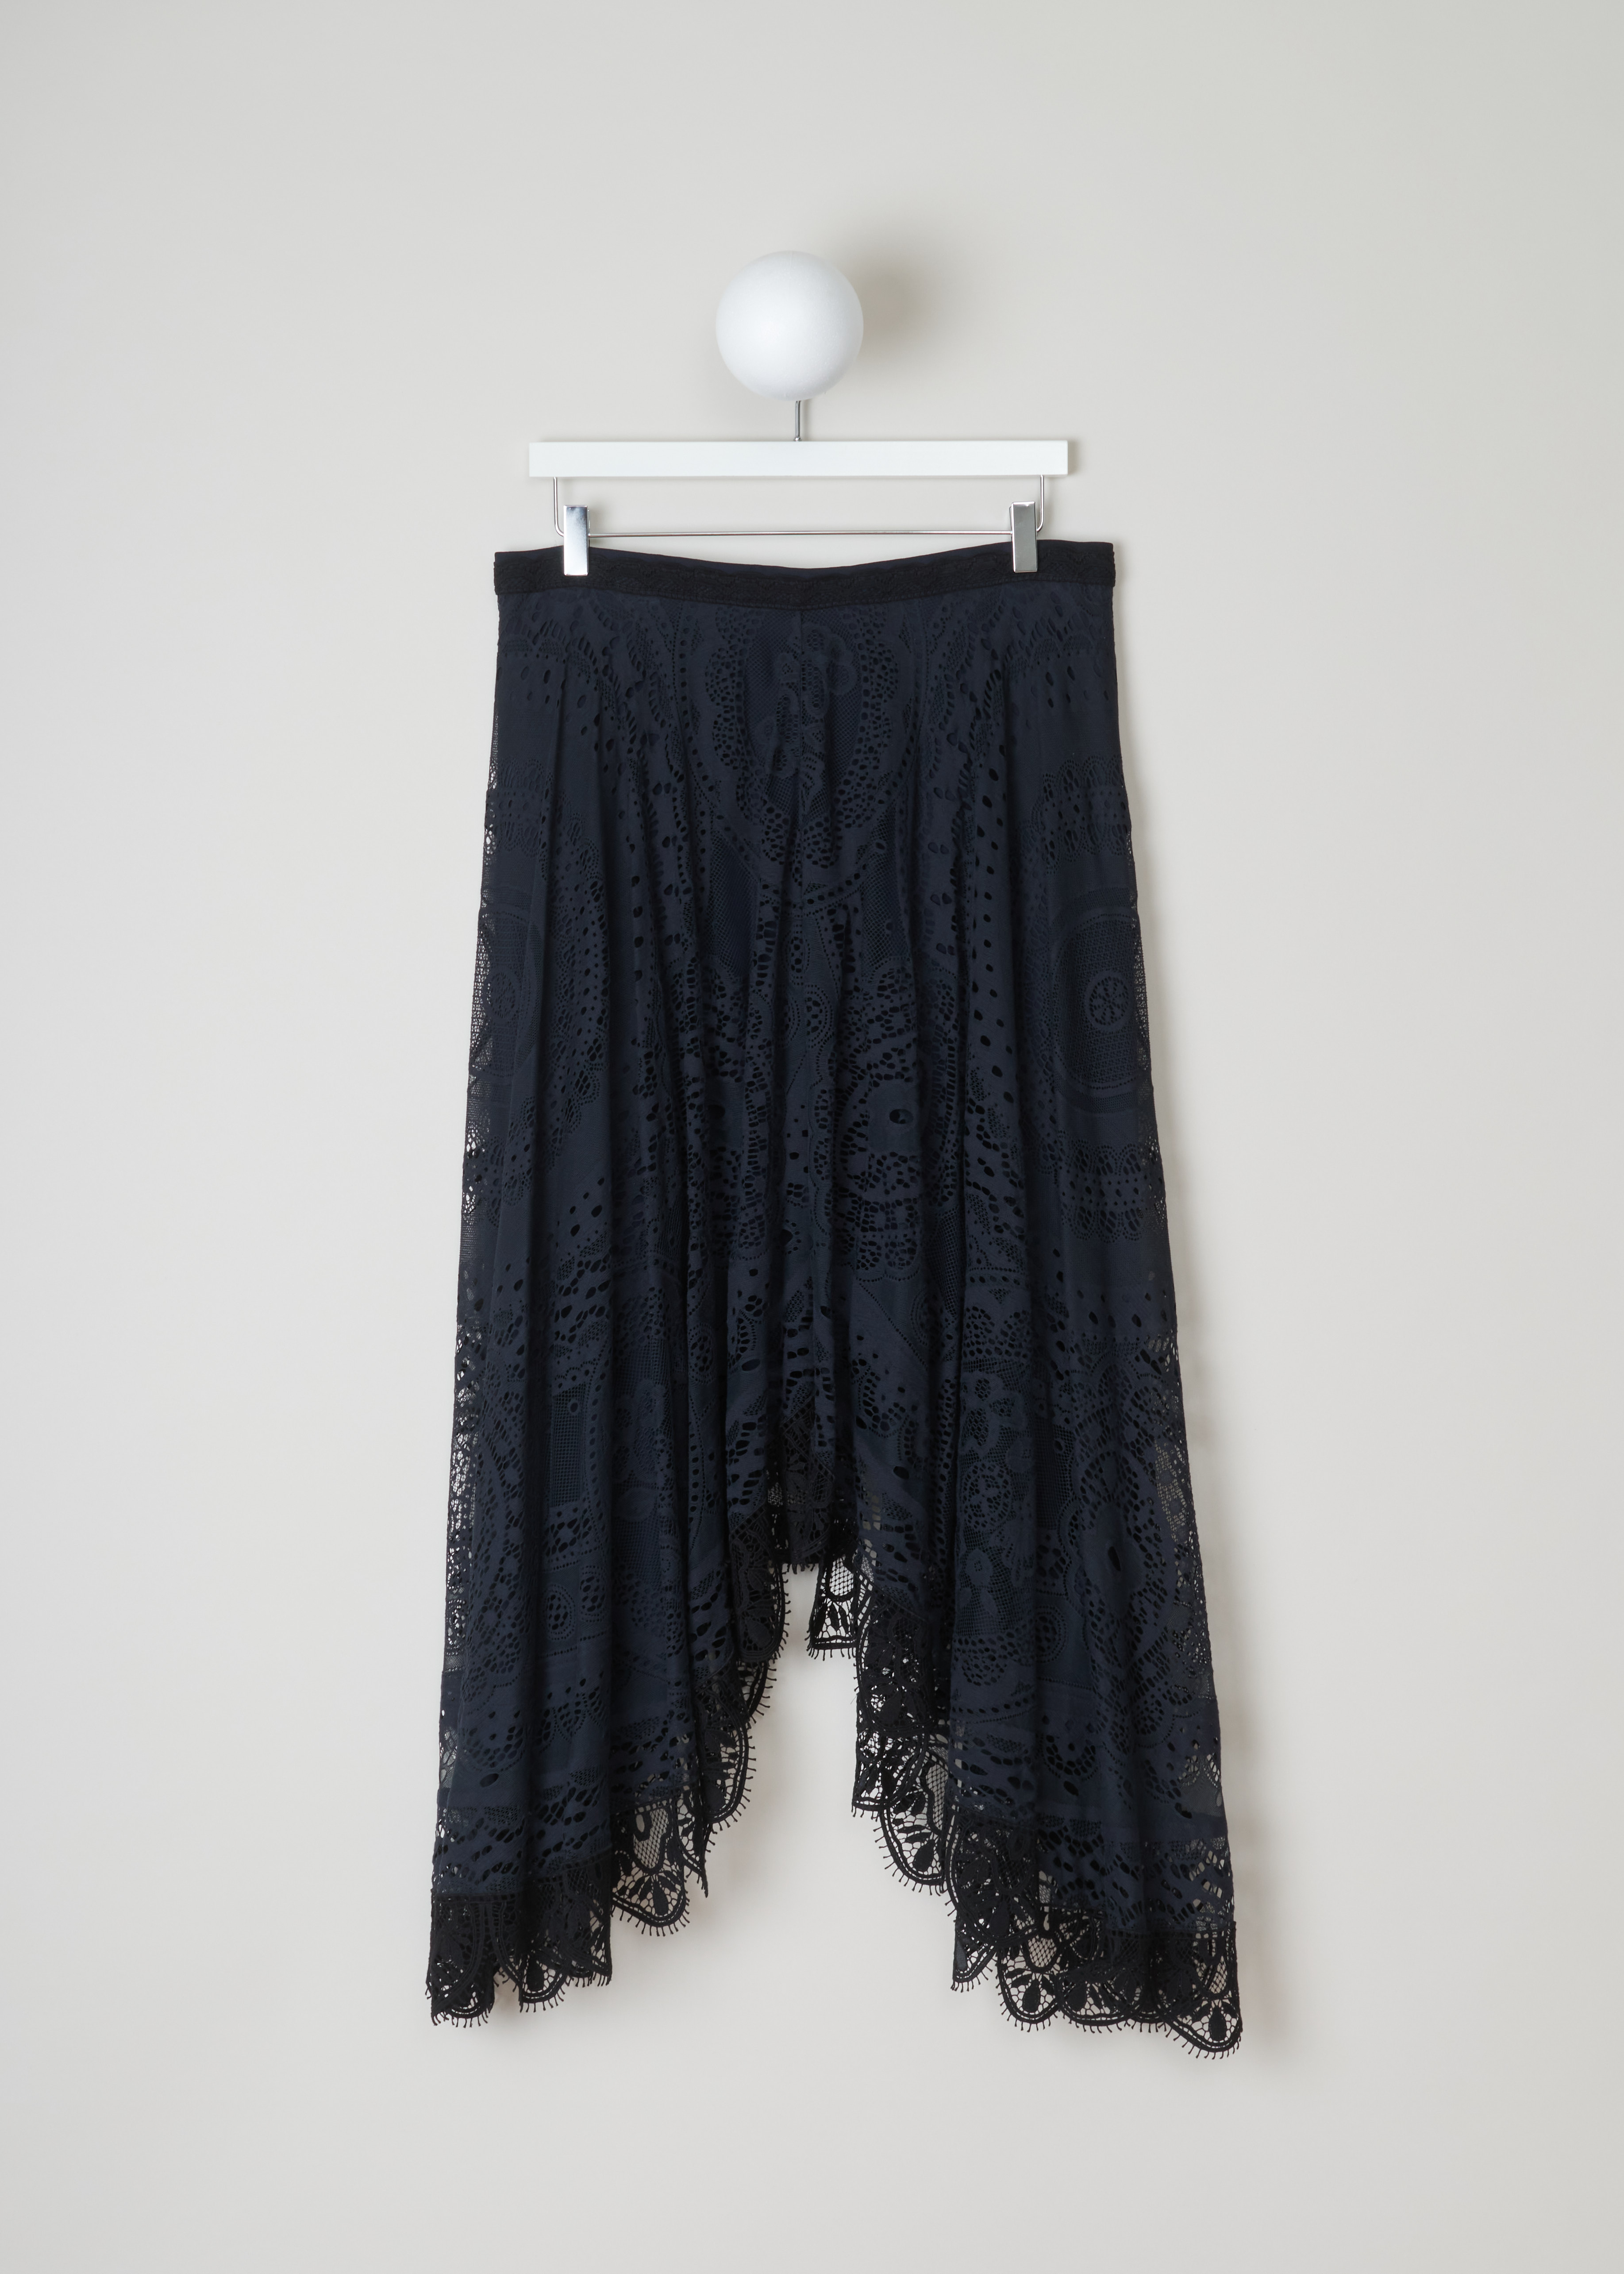 ChloÃ©, Navy lace skirt in an asymmetric model, CHC18SJU0540448A_48A_iconic_navy, blue, front. Lace skirt in navy, cut to an asymmetric model. It has a concealed zipper on the back and frilled hem. The skirt has a slim waist band and a wide fit which causes the skirt to pleat all-round. 